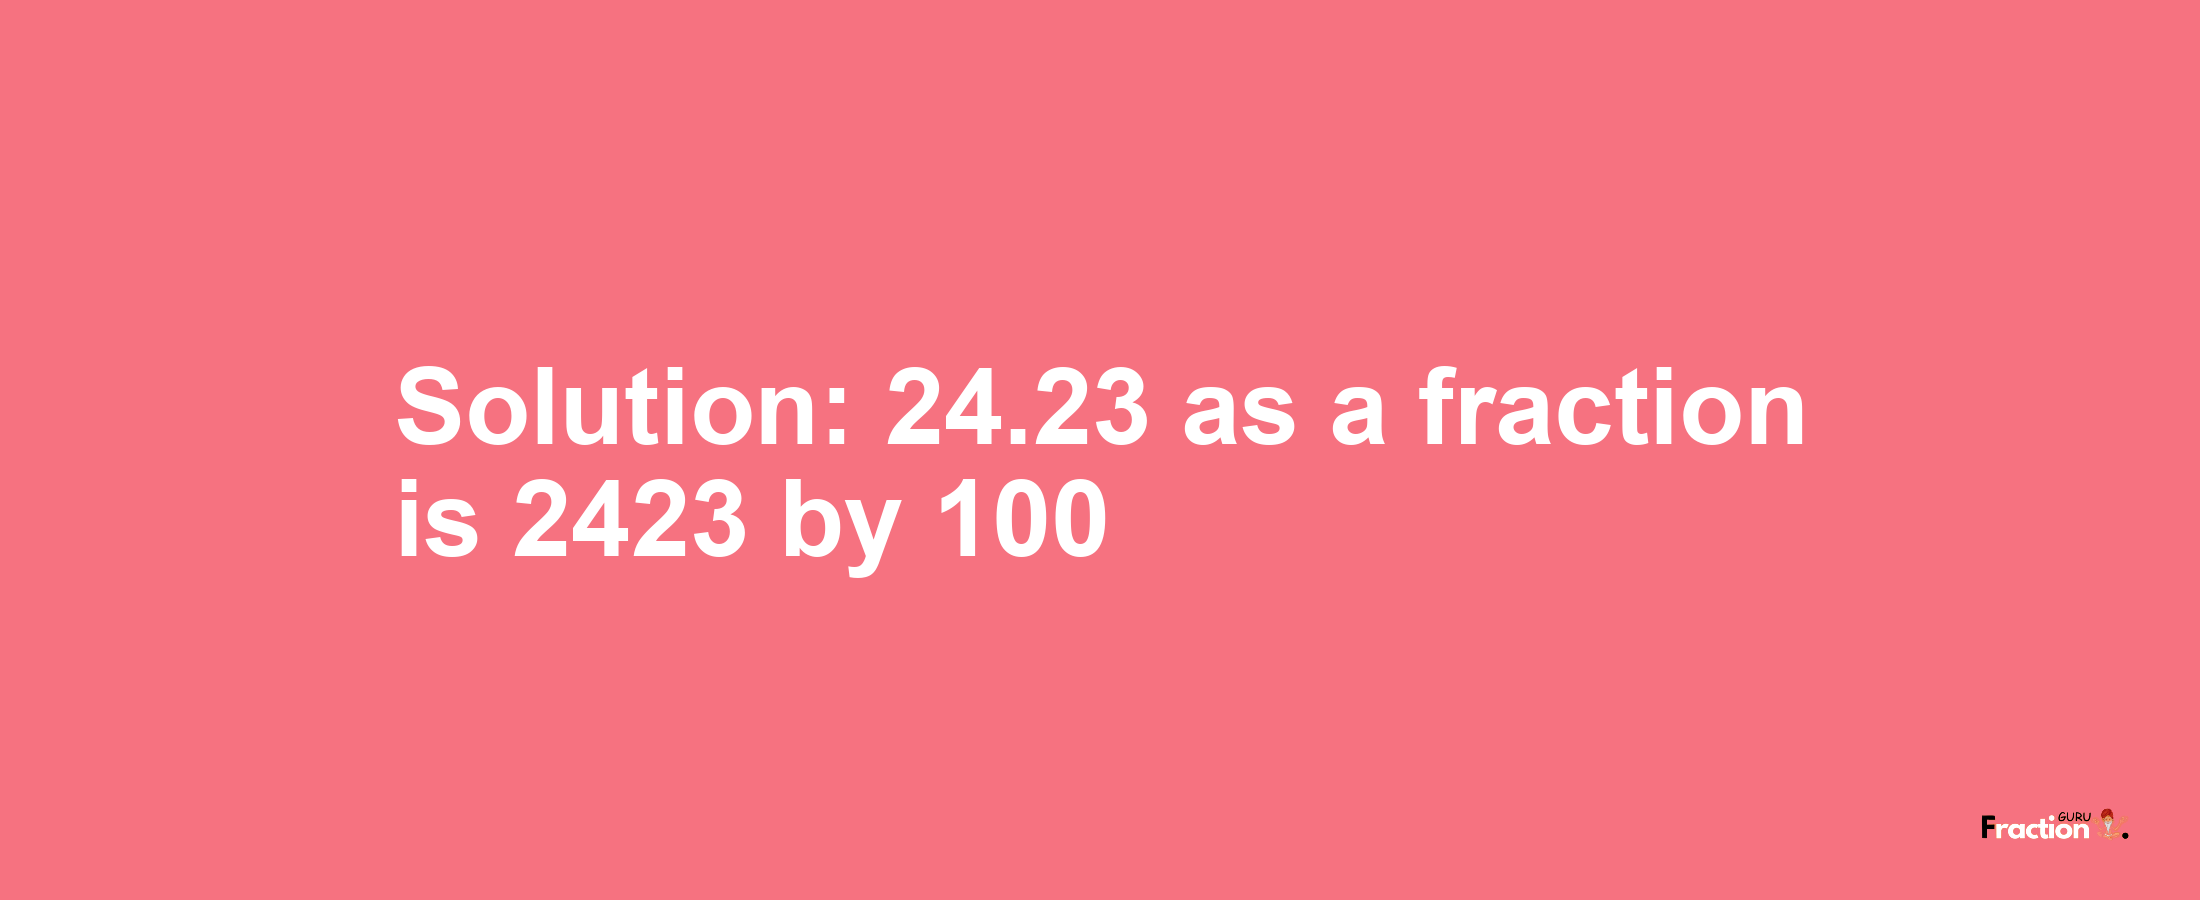 Solution:24.23 as a fraction is 2423/100